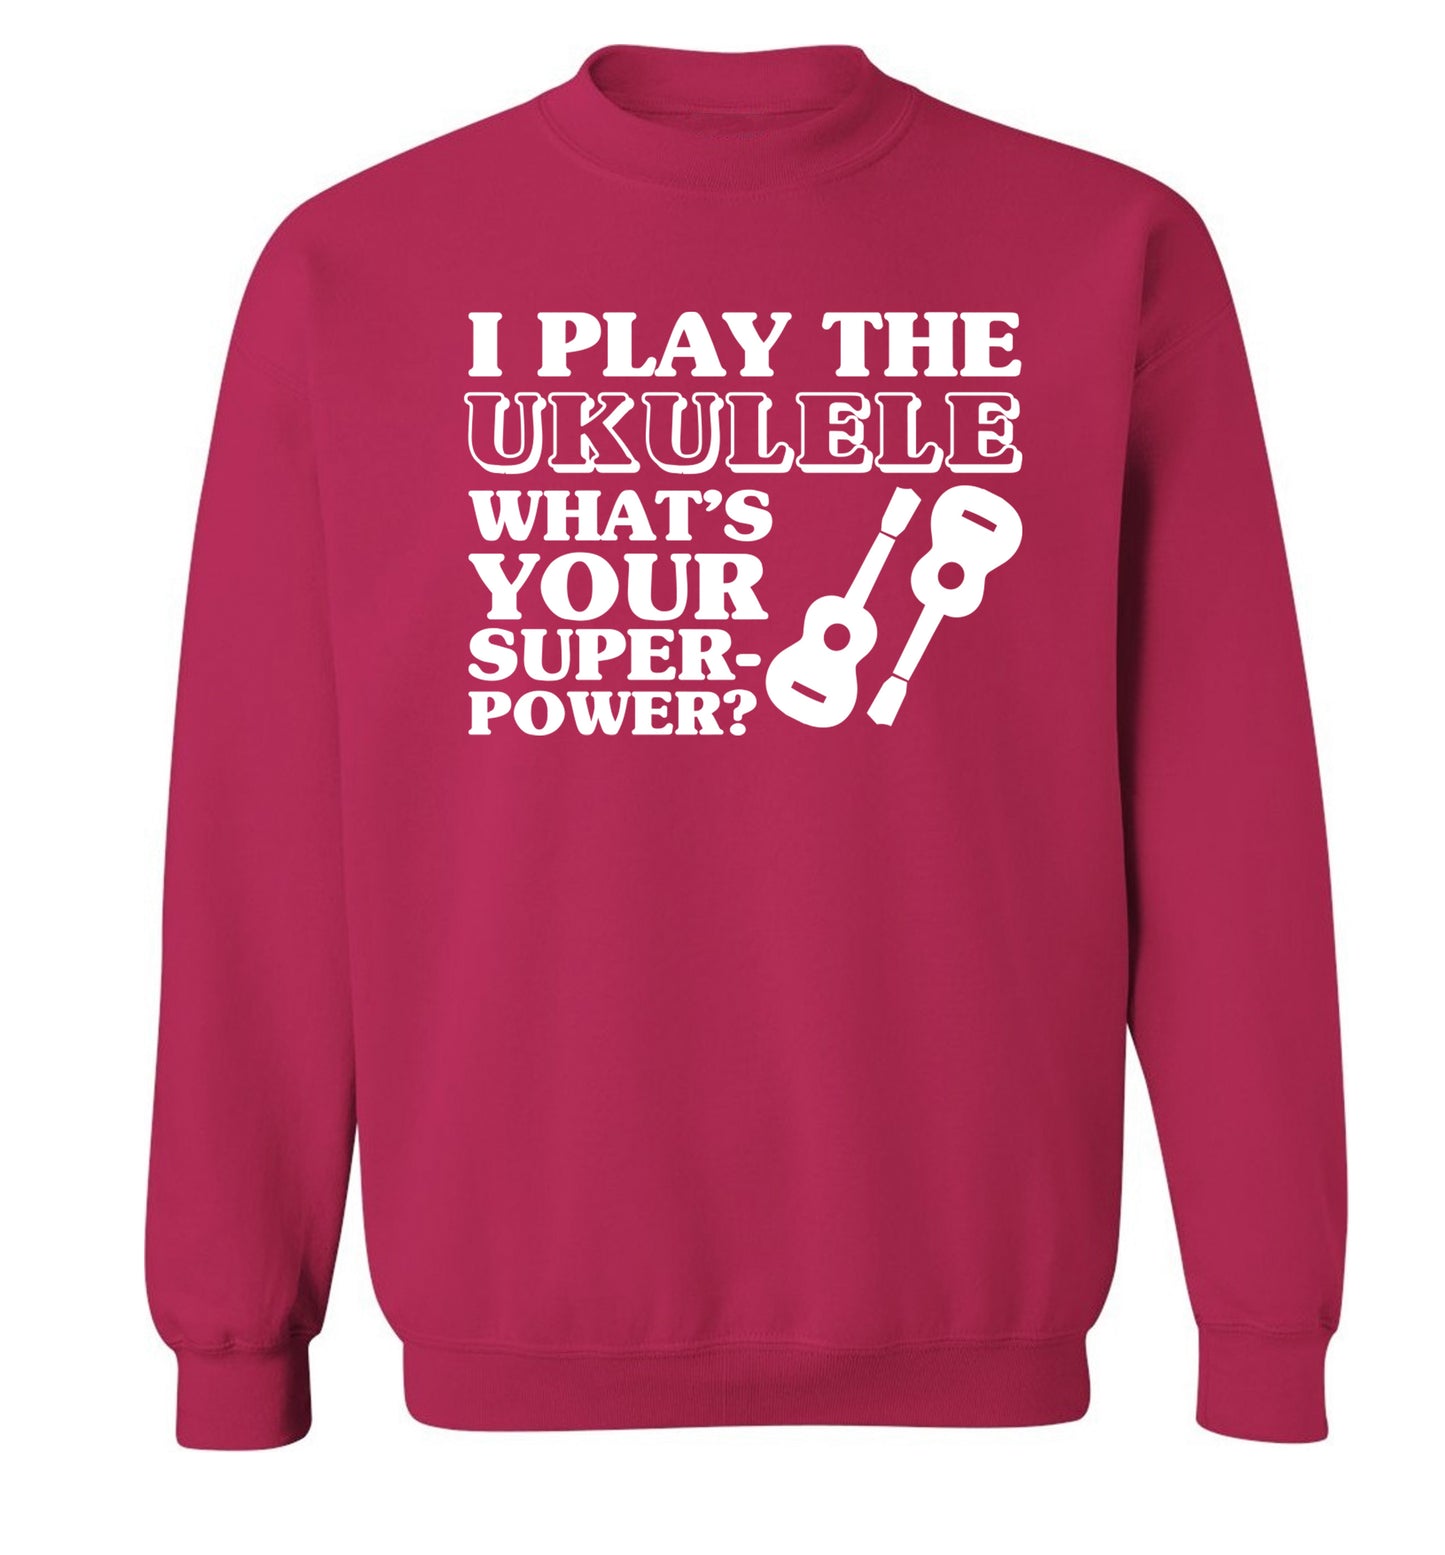 I play the ukulele what's your superpower? Adult's unisex pink Sweater 2XL